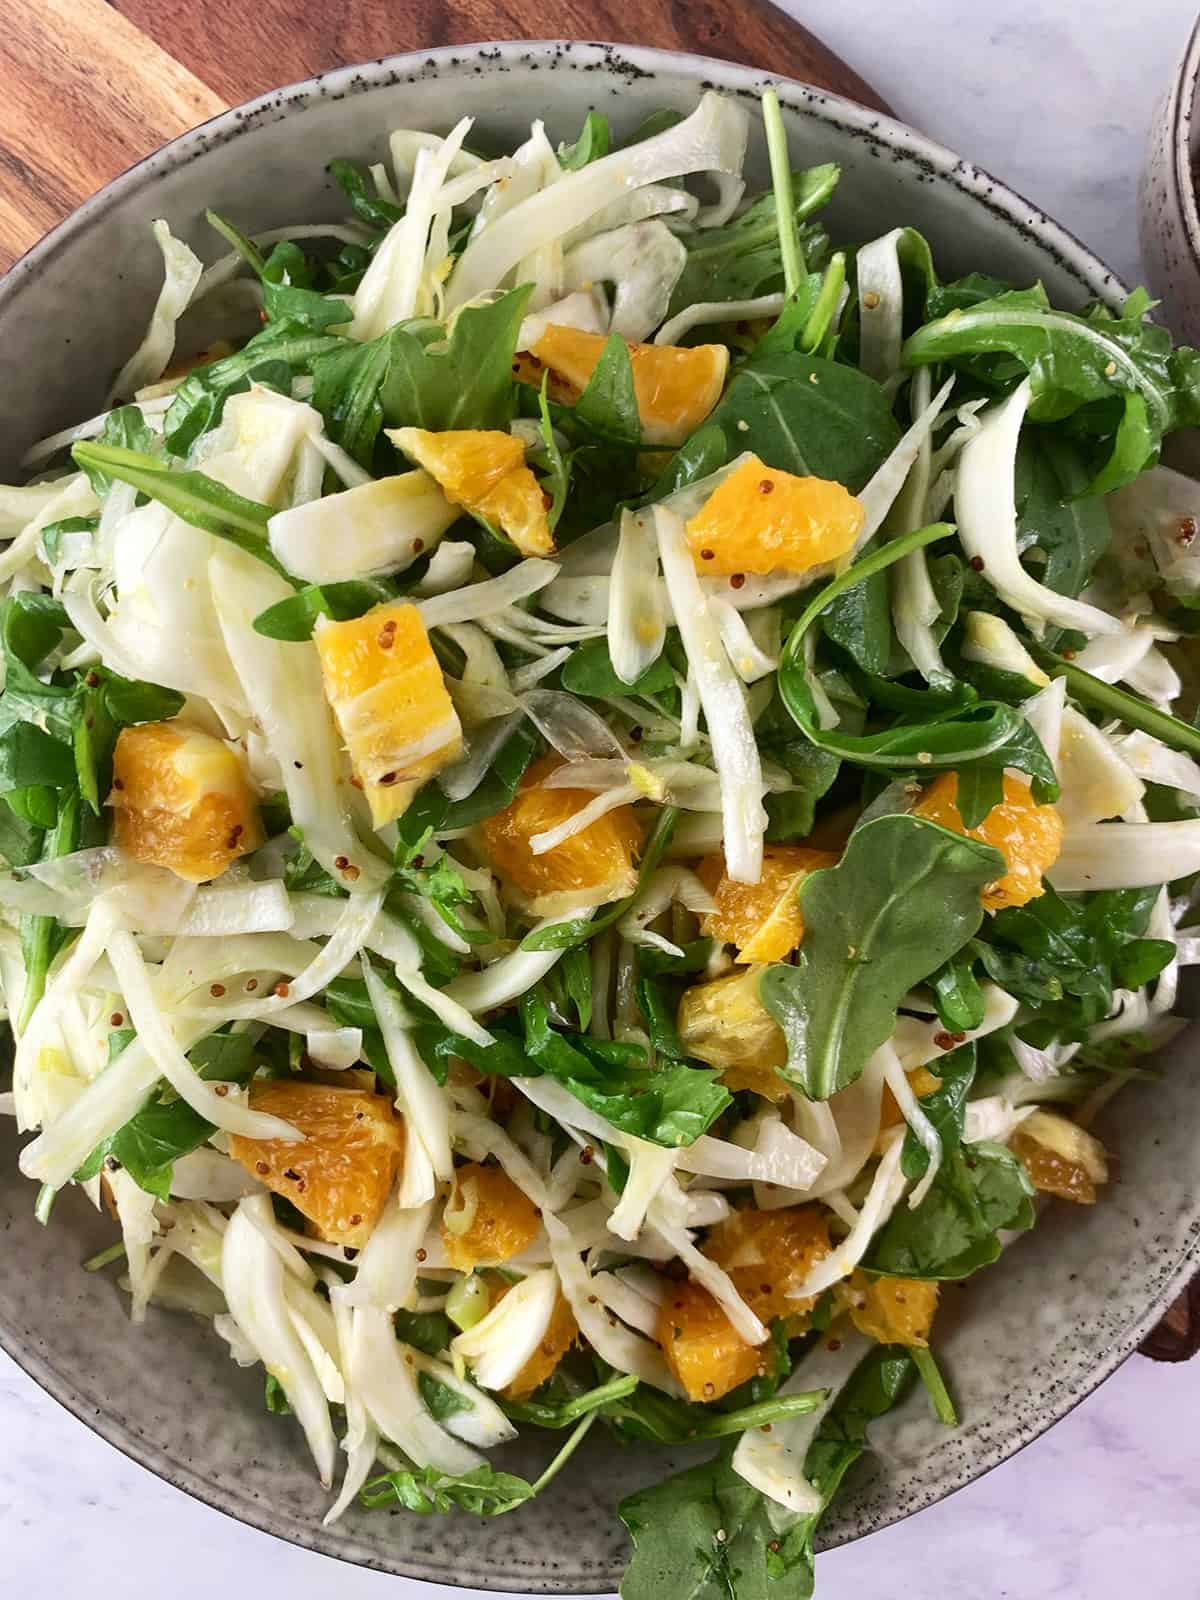 A close up of Fennel and Orange Salad in a deep ceramic bowl on a wooden board.